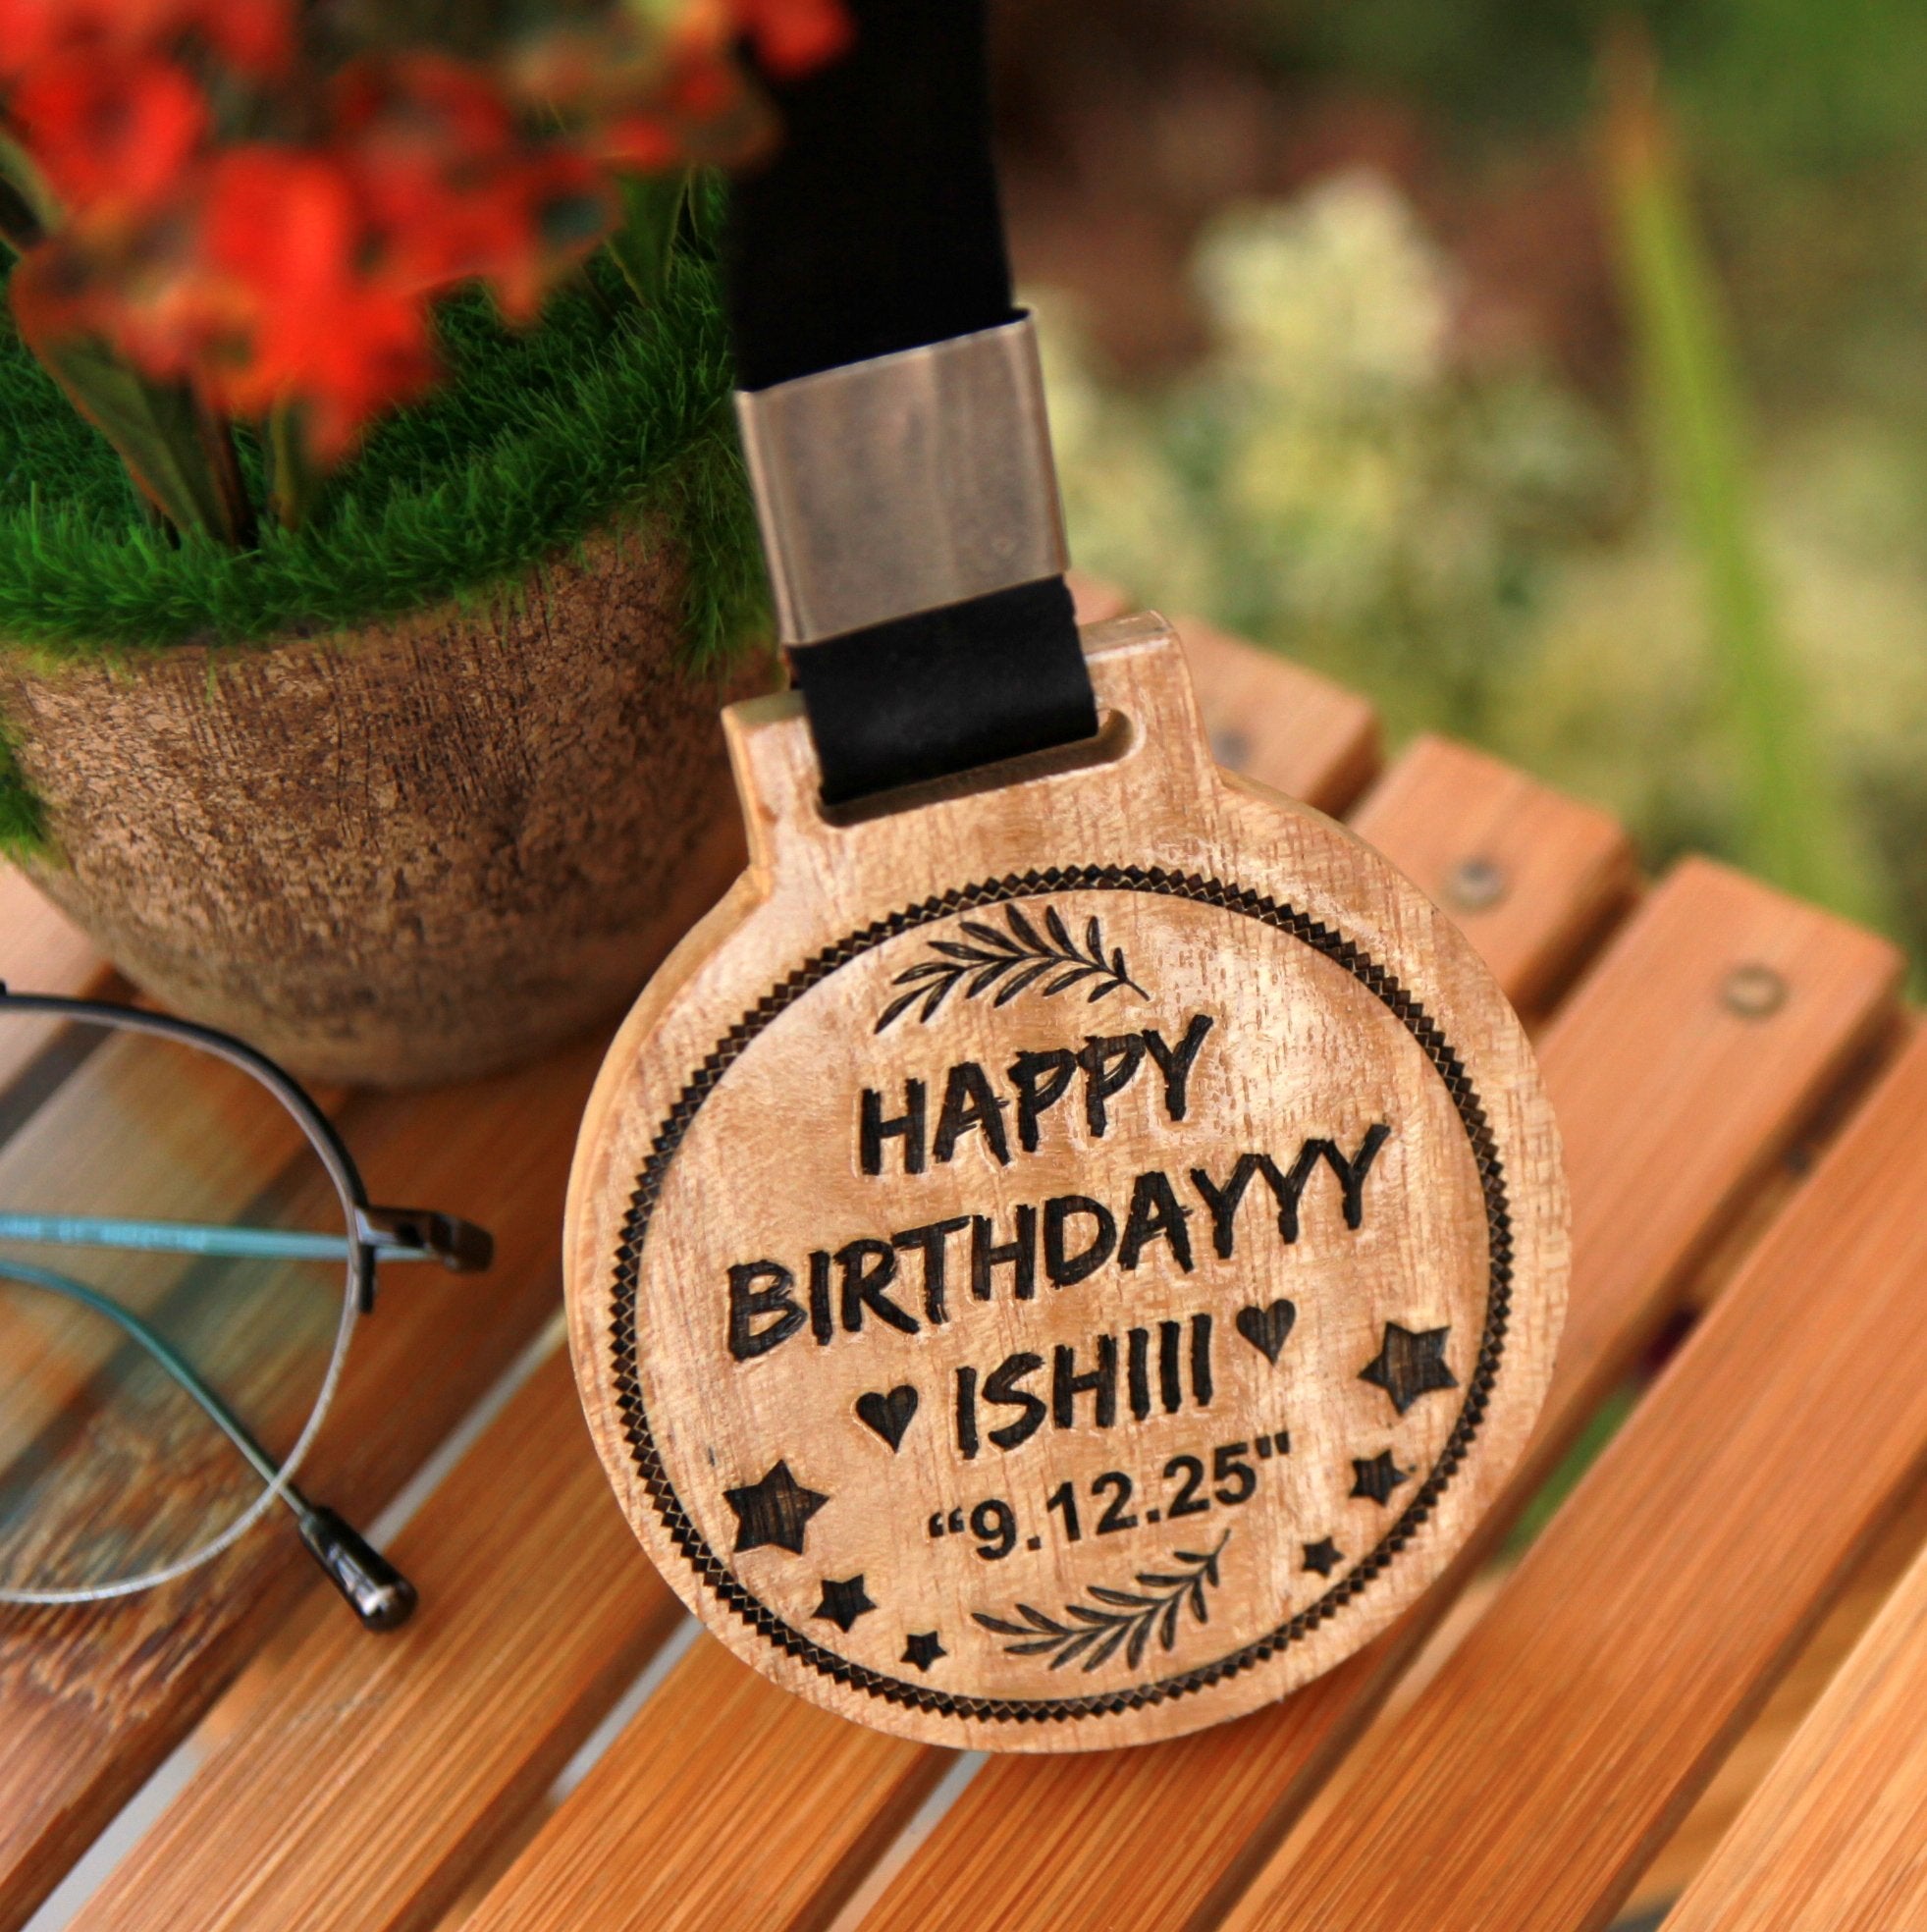 Custom Medal Engraved With Happy Birthday. This is the best birthday gifts for wife and birthday gift for girlfriend. These wooden medals make unique birthday gifts for her and birthday gifts for women.